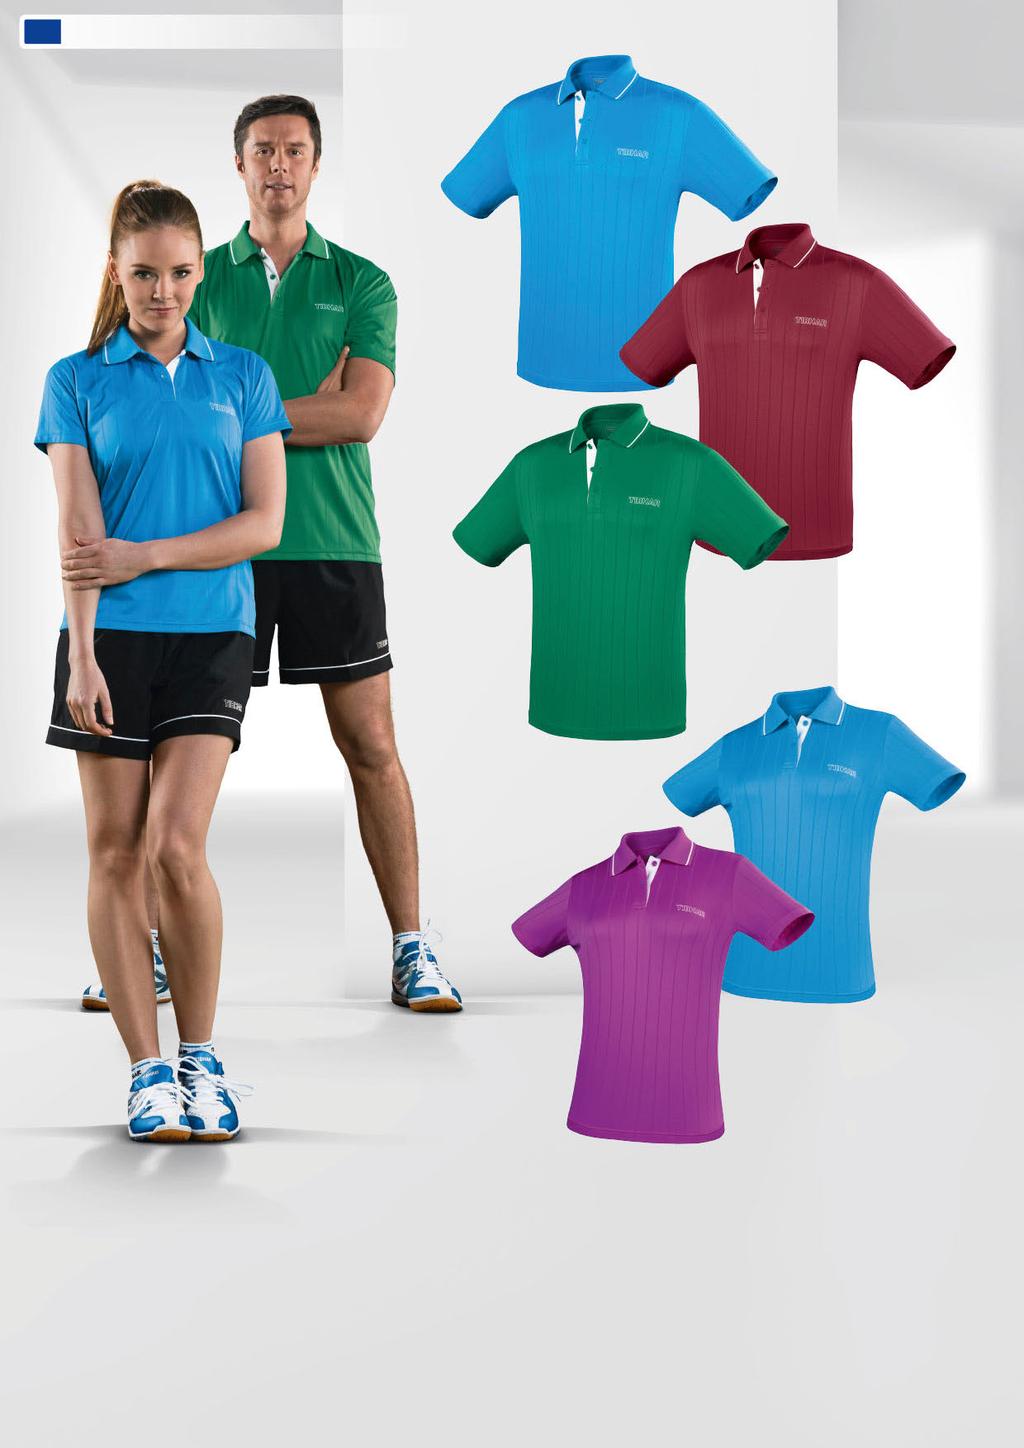 86 PRESTIGE SHIRT PRESTIGE Very comfortable high-quality polo shirt featuring a classical design Optimal heat and sweat management (evacuation to the surface of the fabric) Composition: 100%